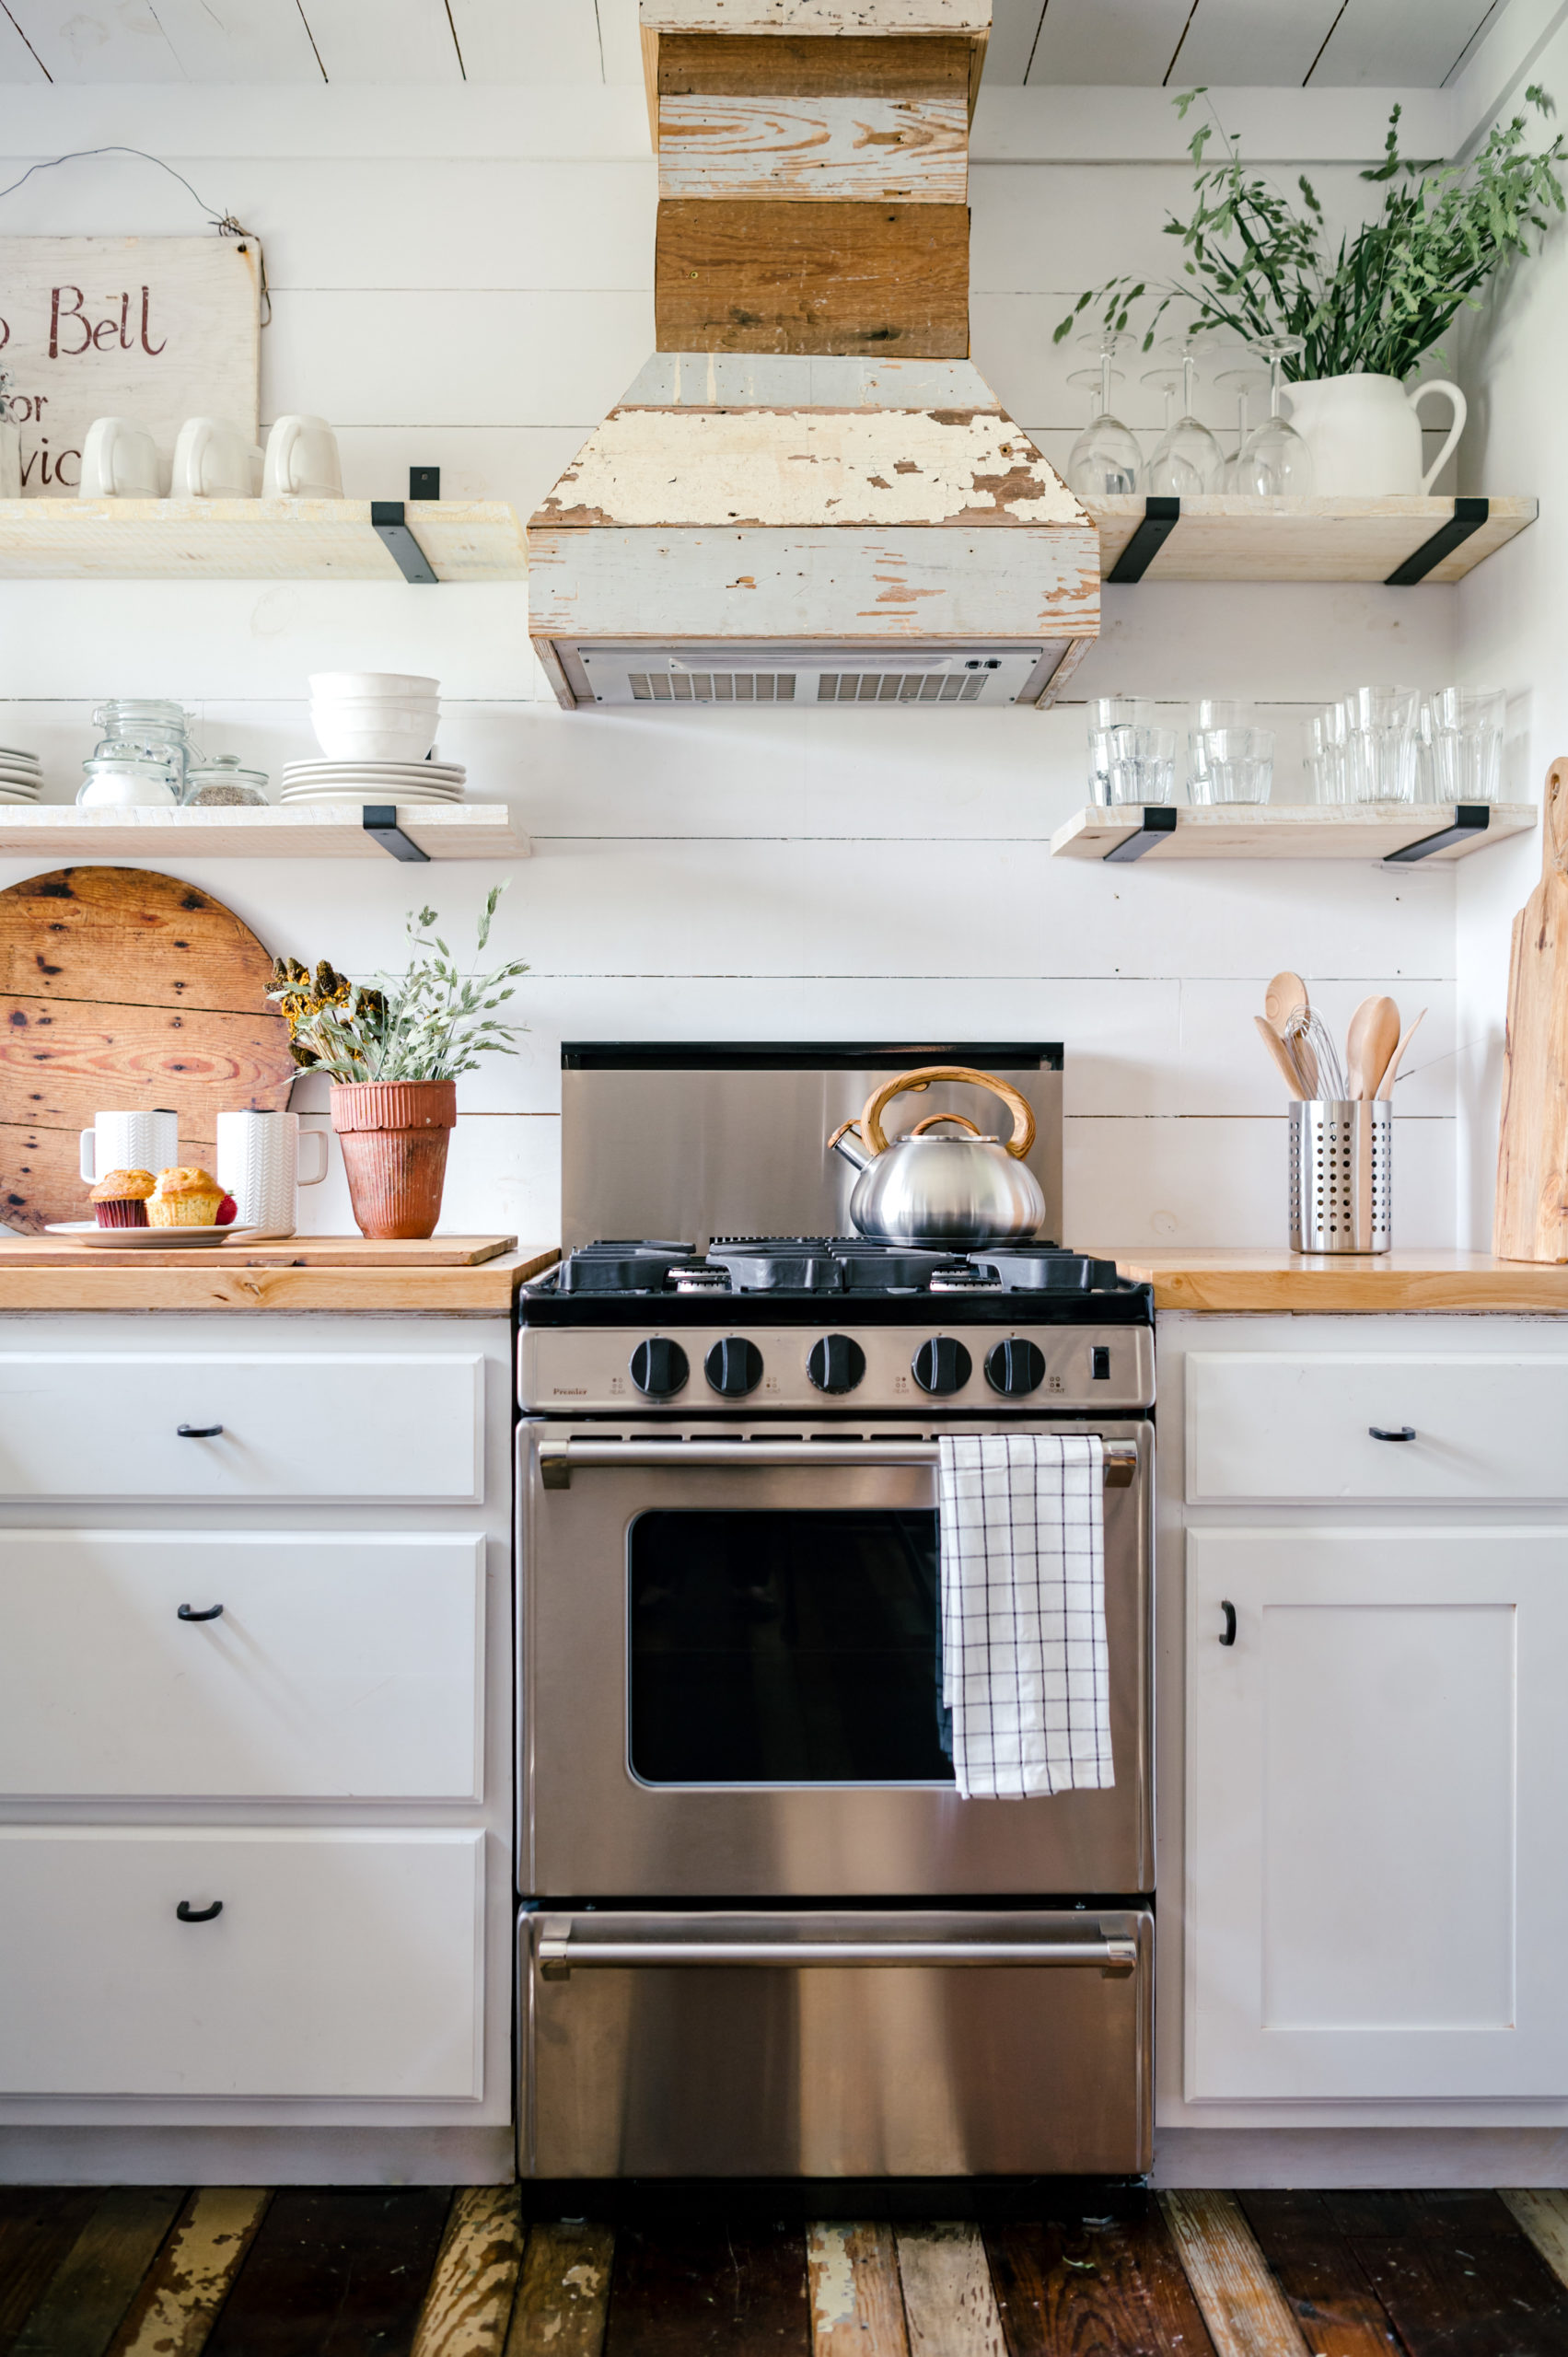 Airbnb photography of kitchen with white cabinets, wooden tabletops, stainless steel stovetop and over